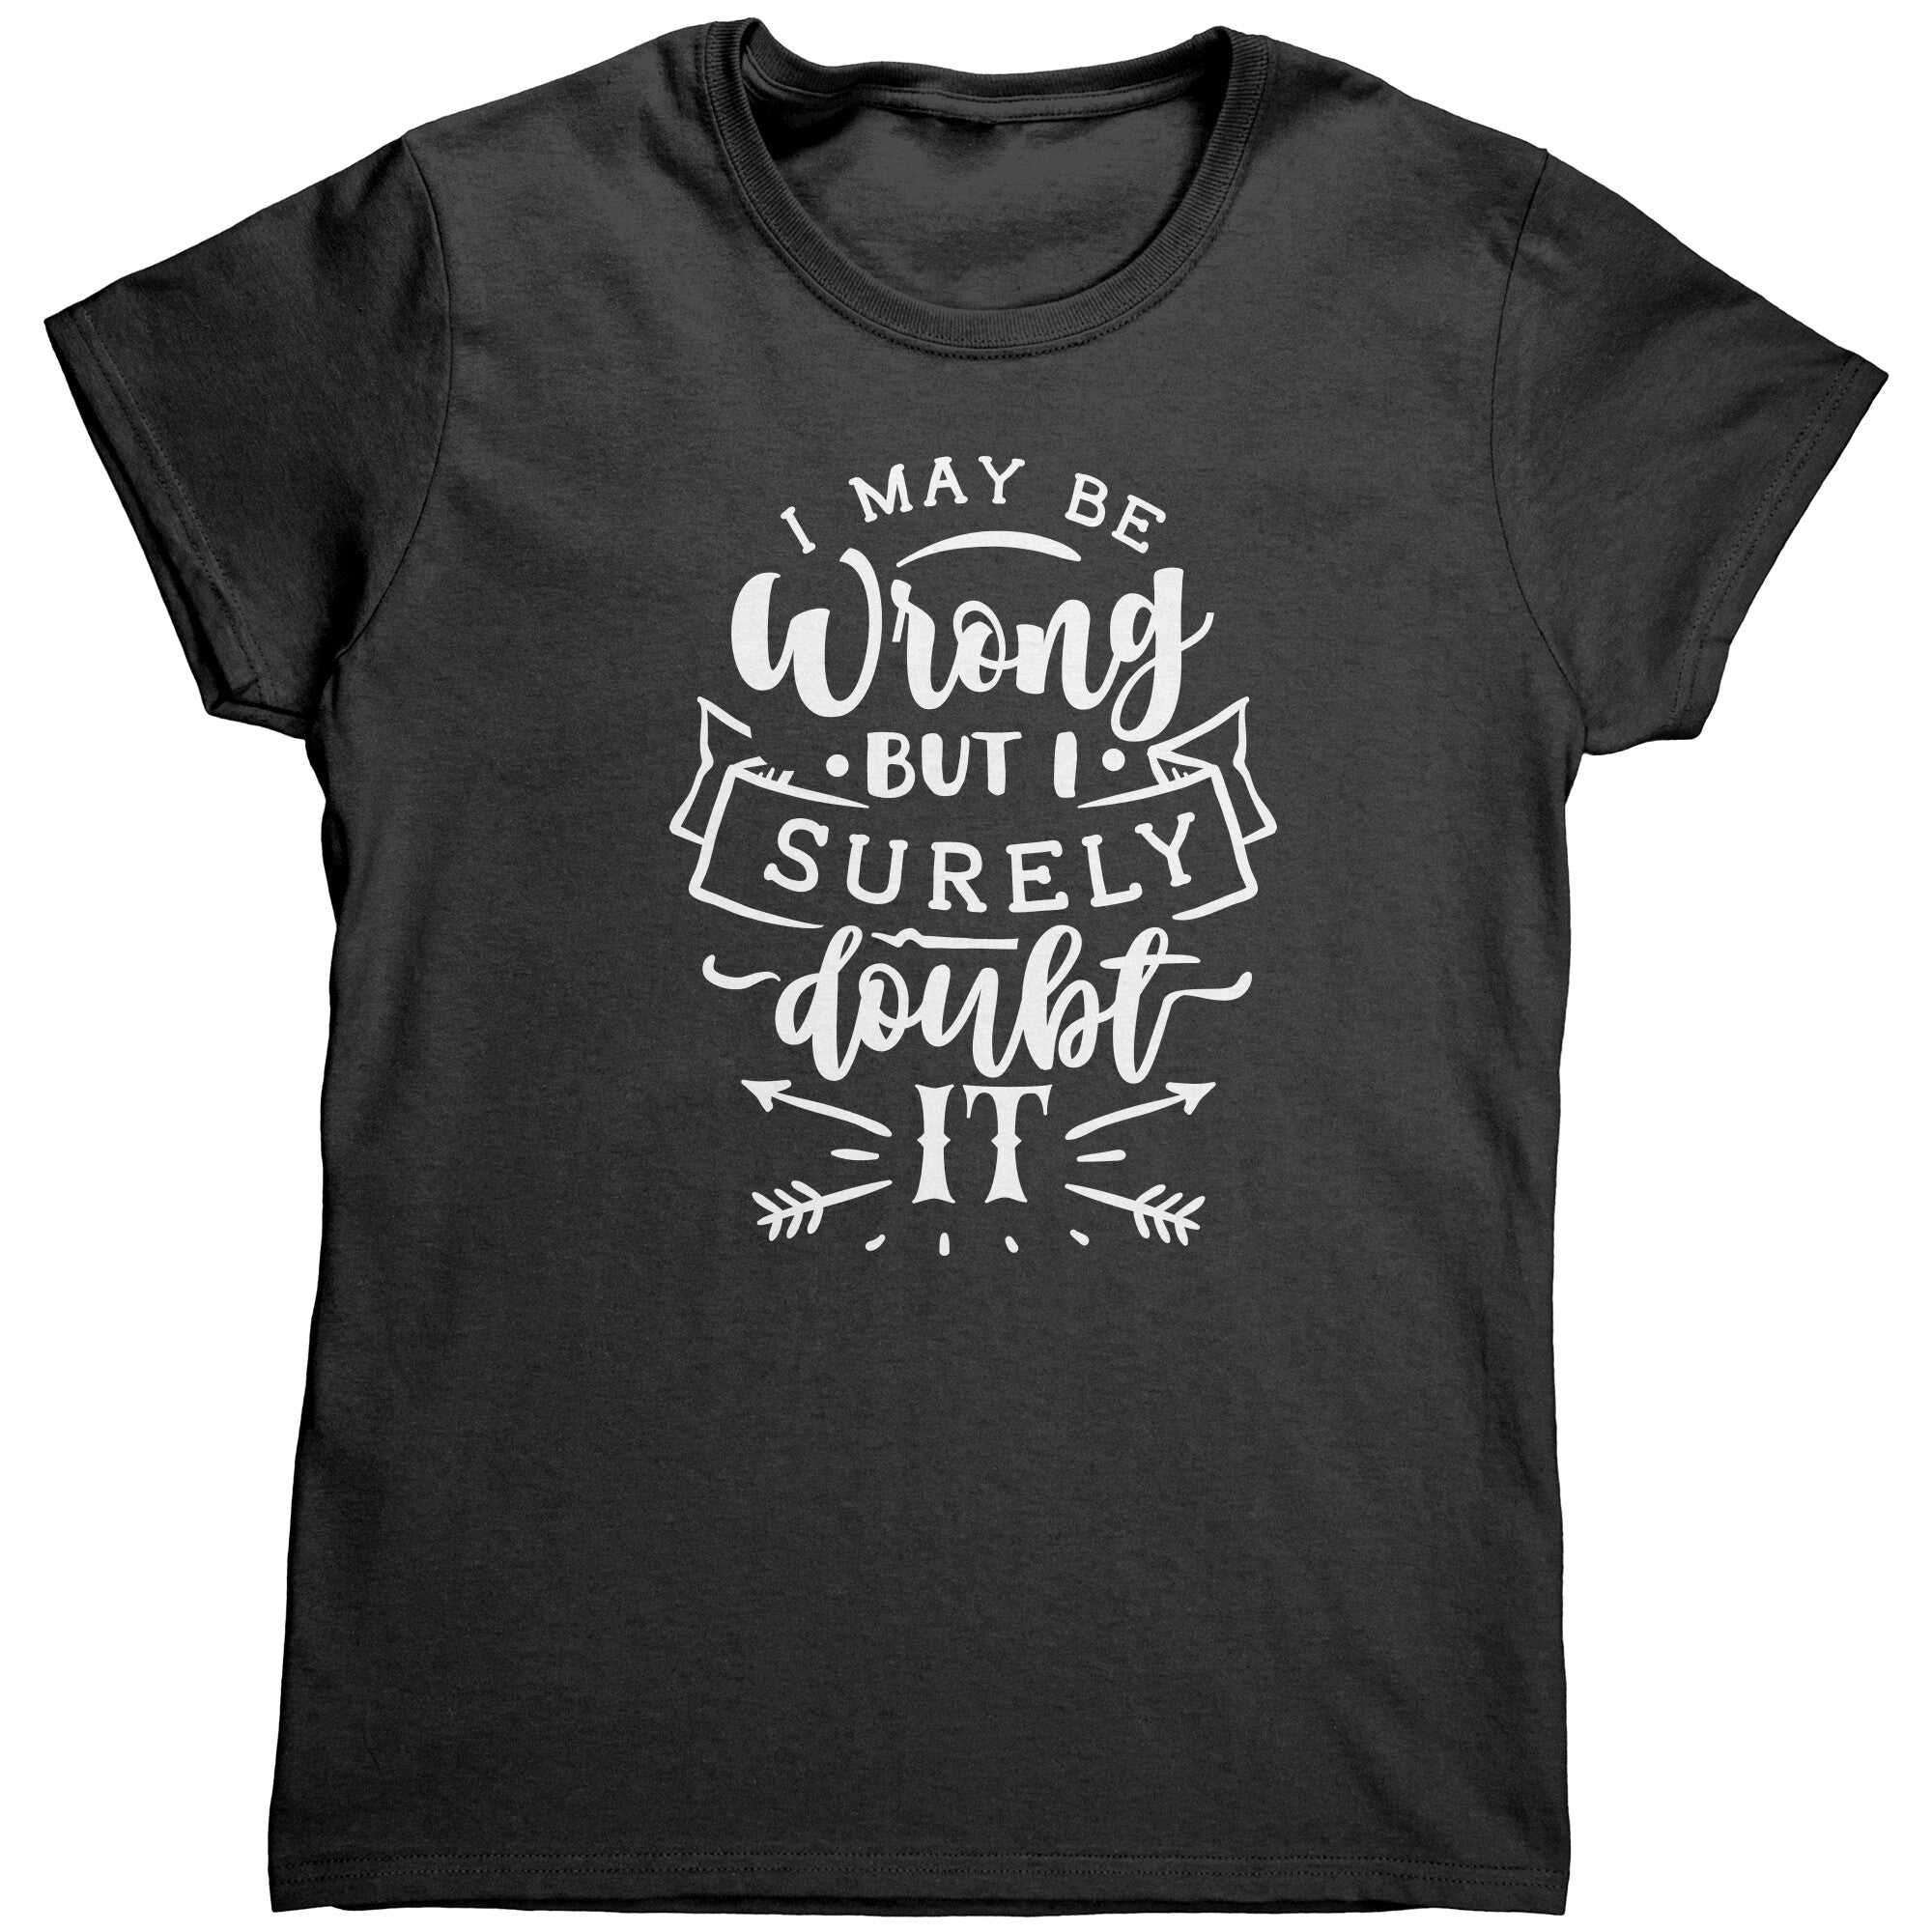 I May Be Wrong But I Surely Doubt It (Ladies) -Apparel | Drunk America 